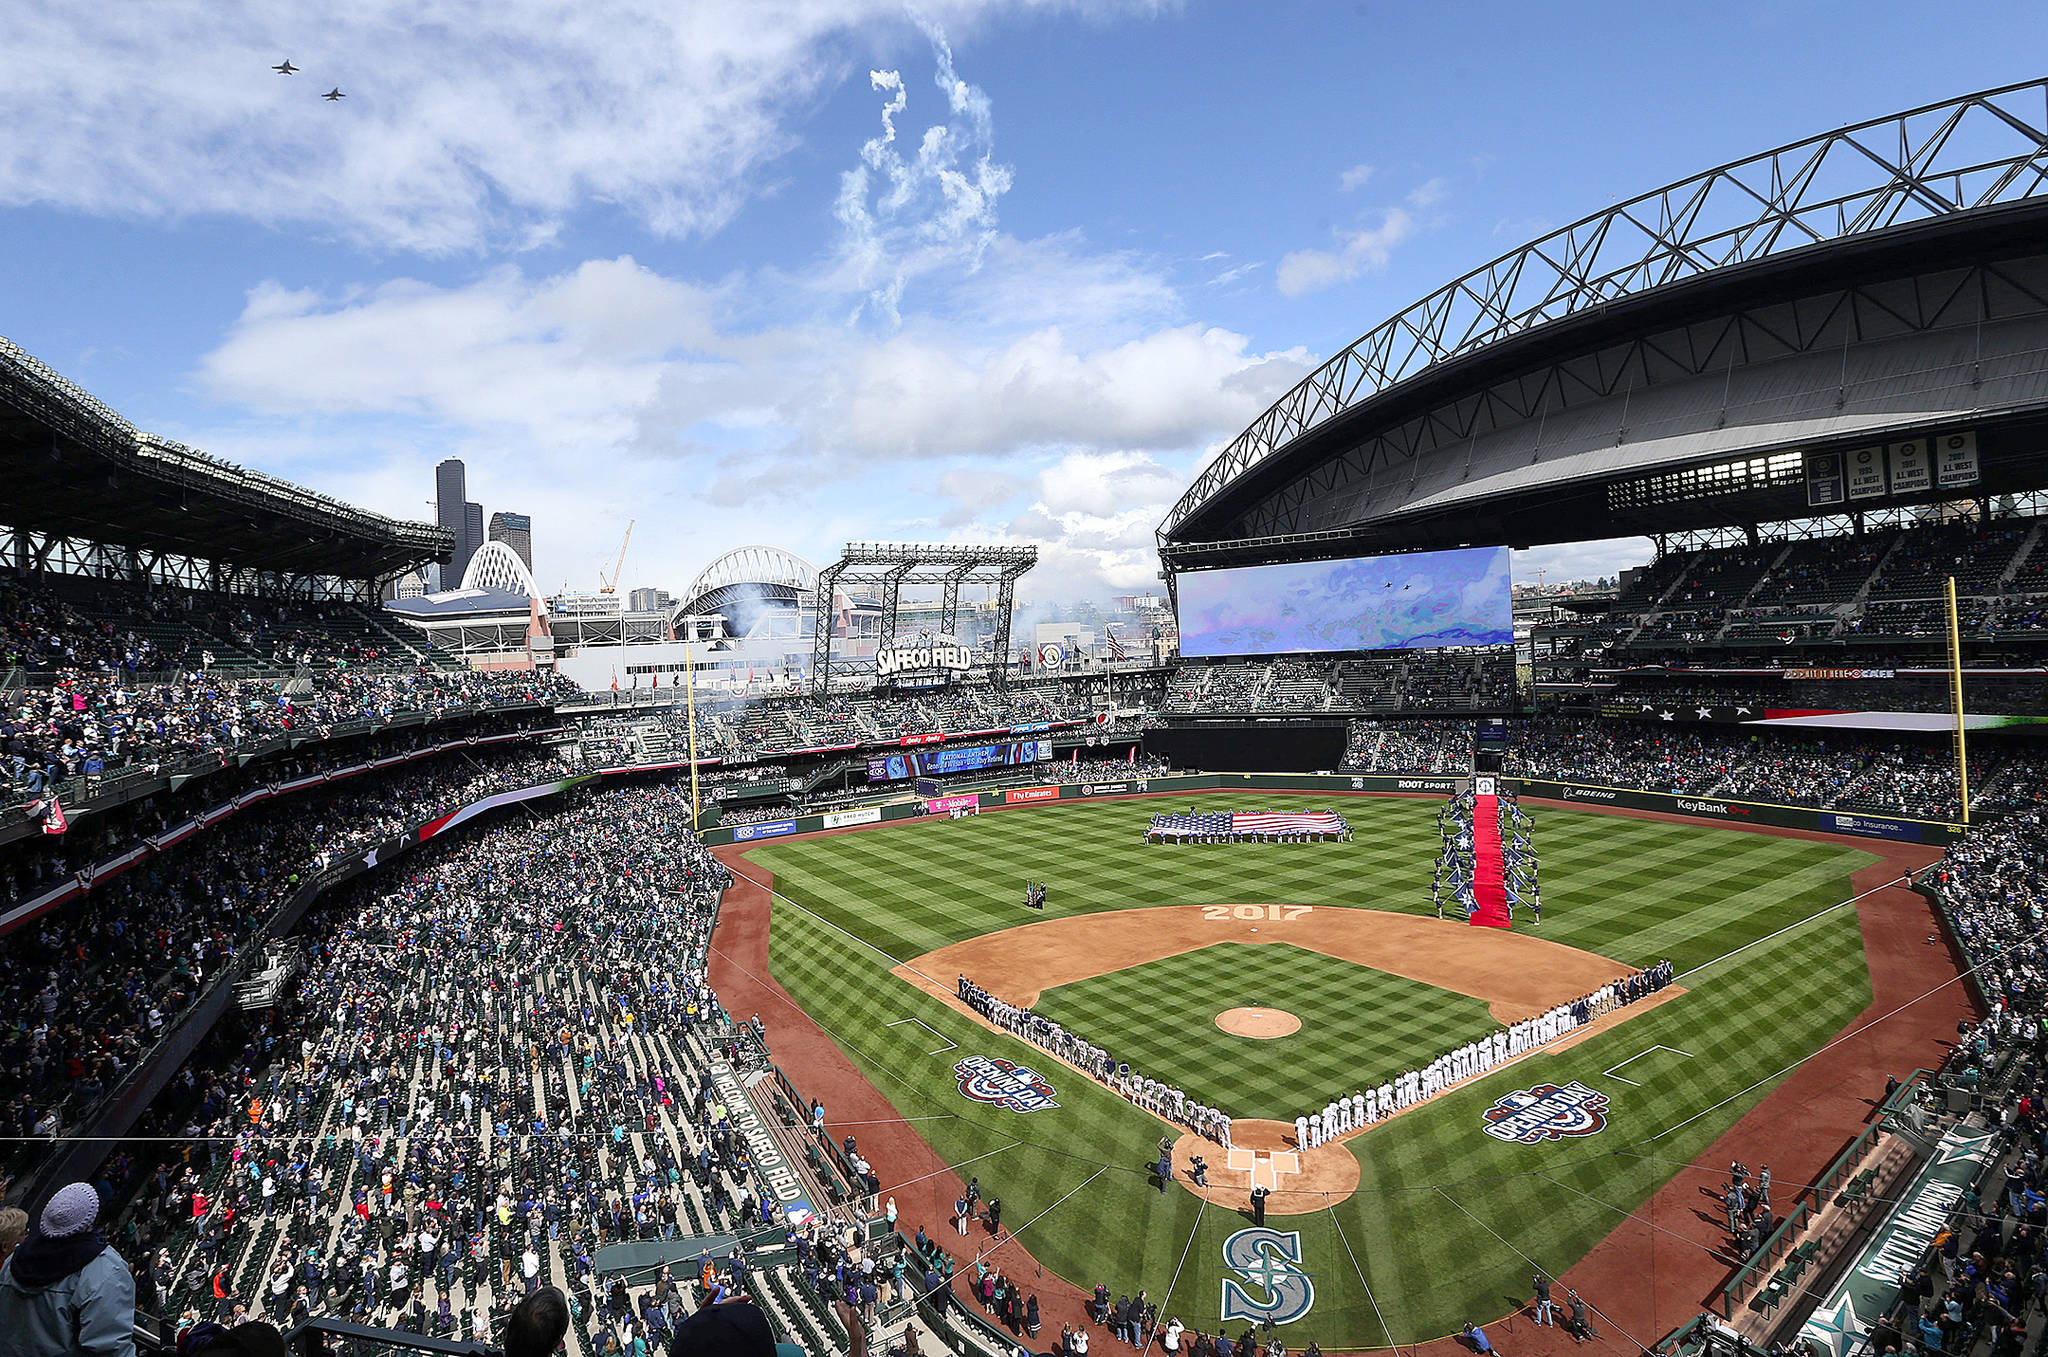 Seattle stadiums have given taxpayers their money’s worth